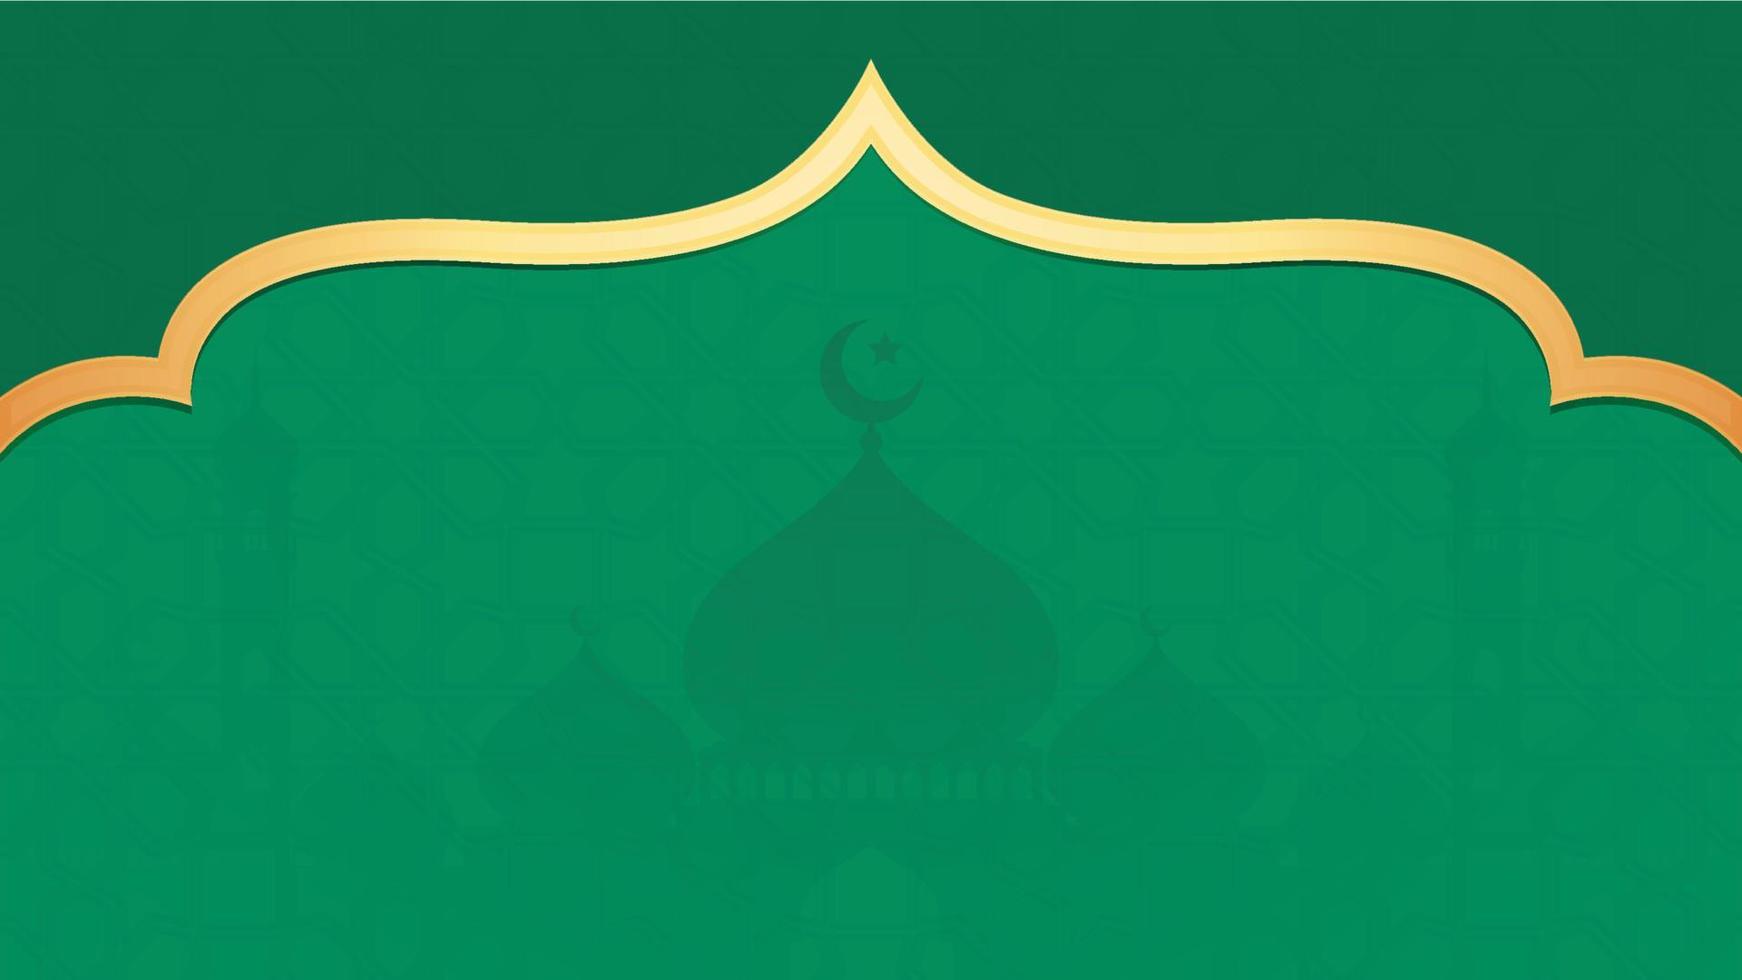 Islamic Arabic Green Luxury Background with Geometric pattern and Beautiful Ornament vector